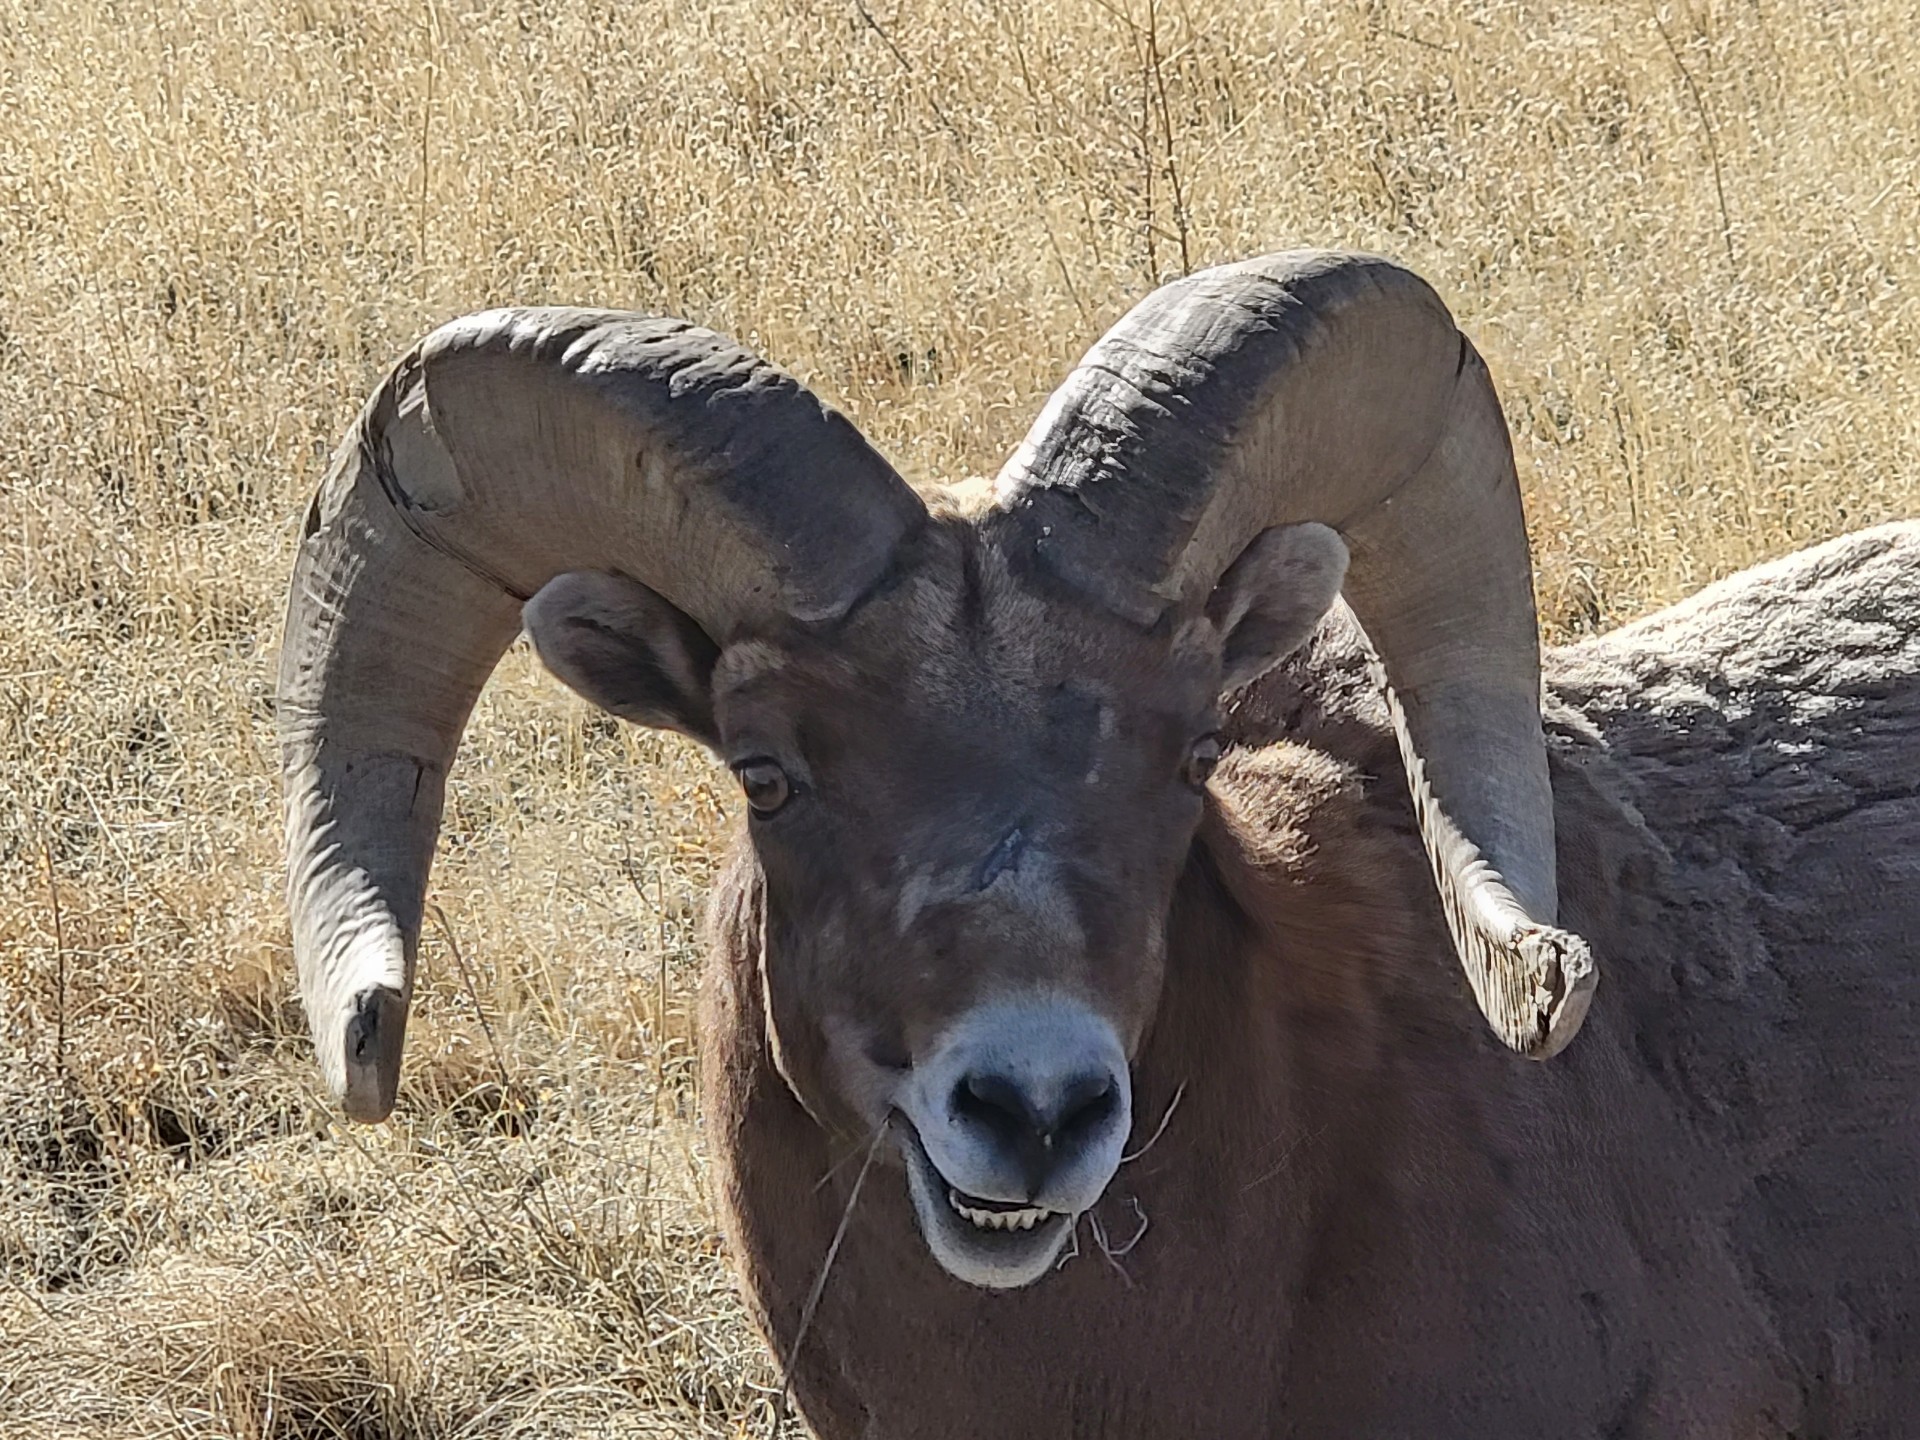 Photo by Amanda Dyer  |  I call this "Sheepish Grin"
Couple of Big Horn Sheep hanging out on the side of highway. Several cars had stopped to watch and take pics. This was taken from the passenger side with about a 20x zoom
Pic taken Valentine's Day weekend 2022